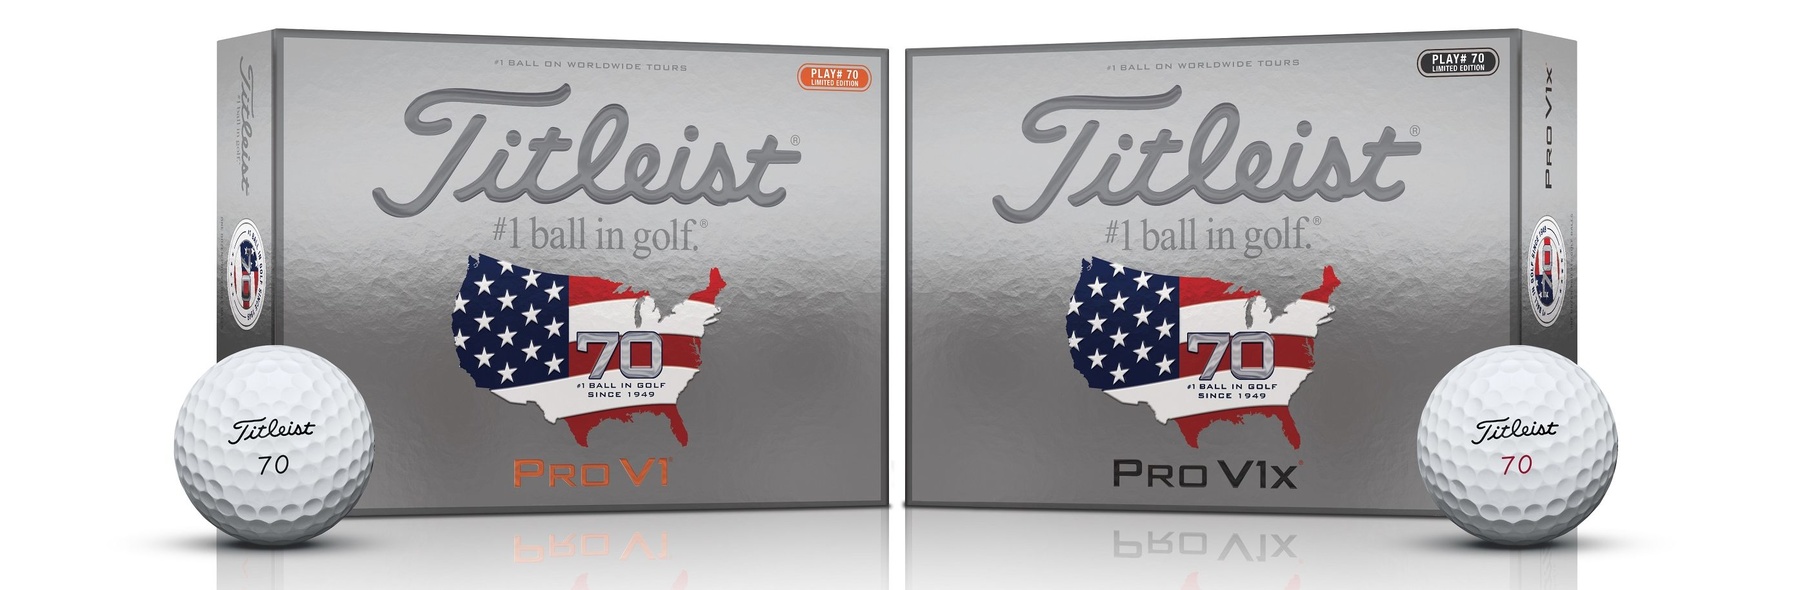 2018_US Open #70 Limited Edition Packaging (mr)